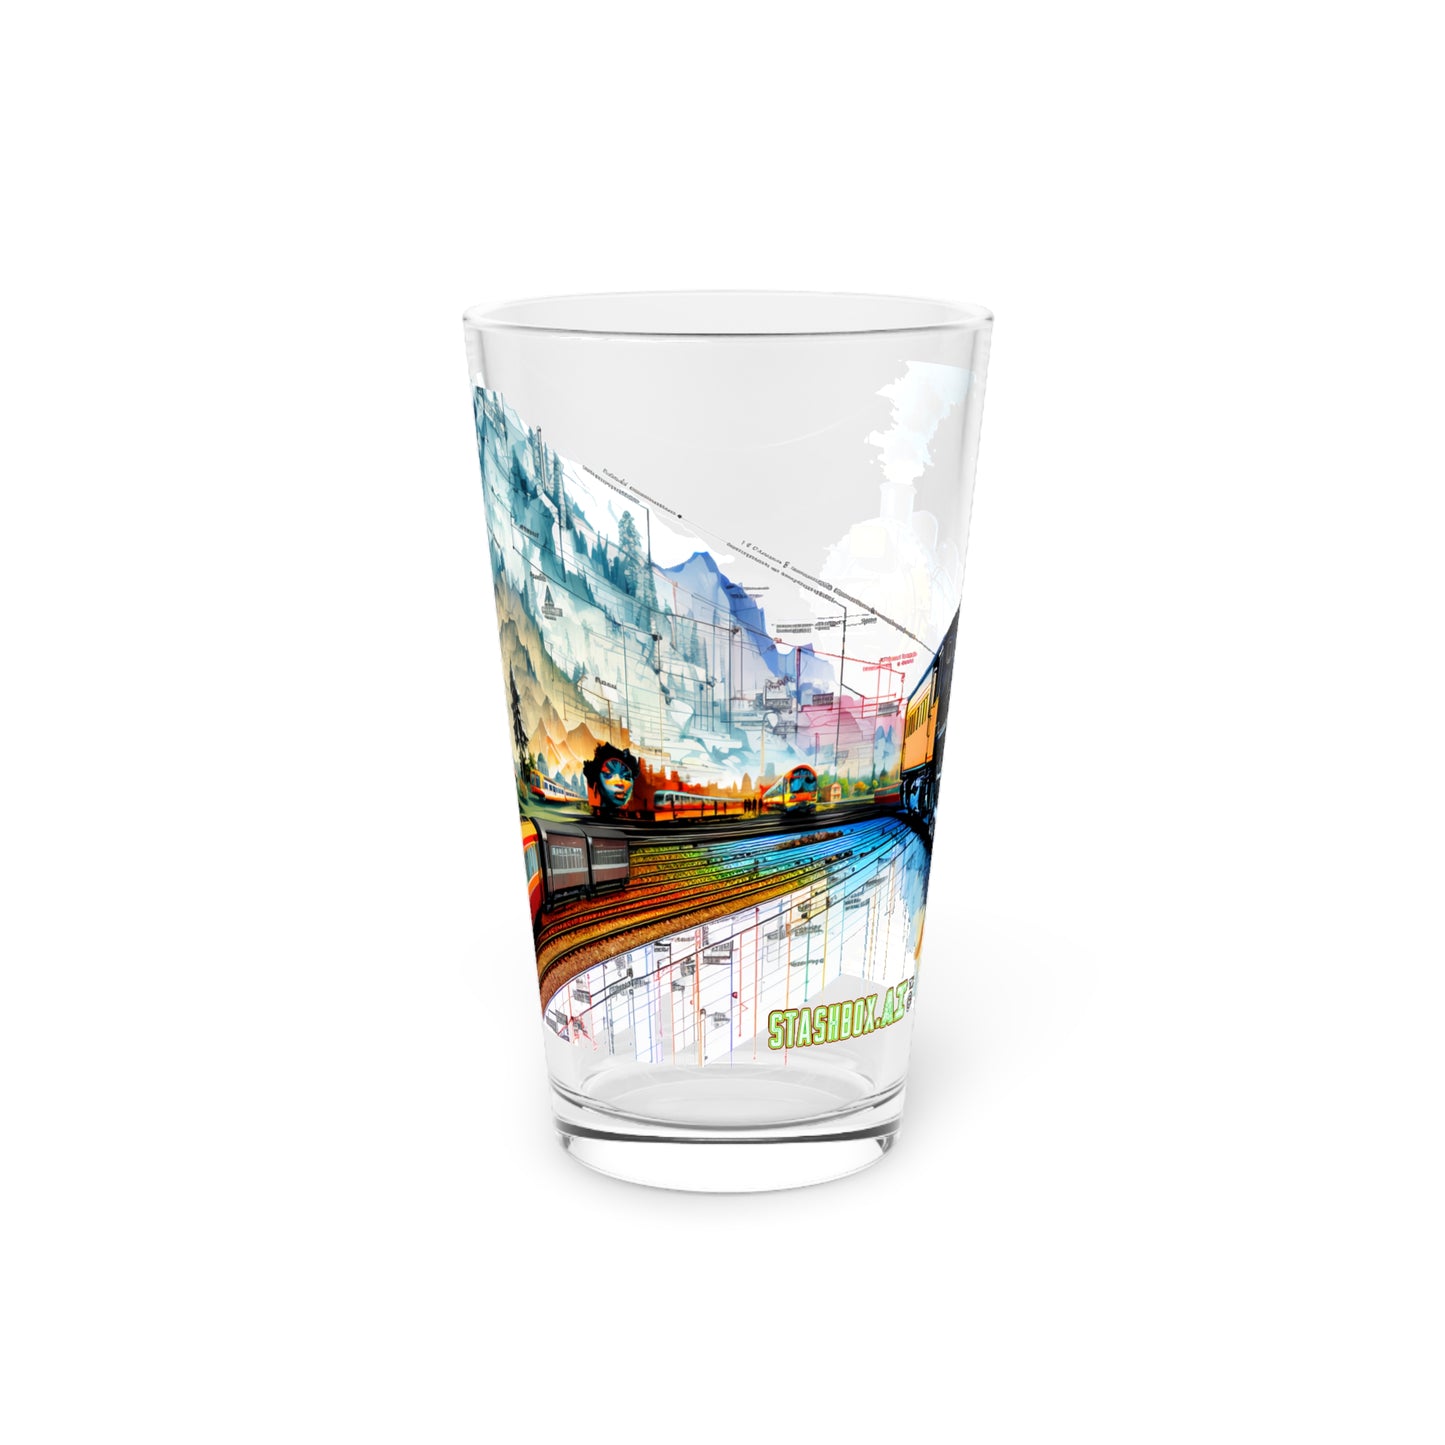 Collectible 16oz Glass: Colorful Graphic Art with Precisionist Lines